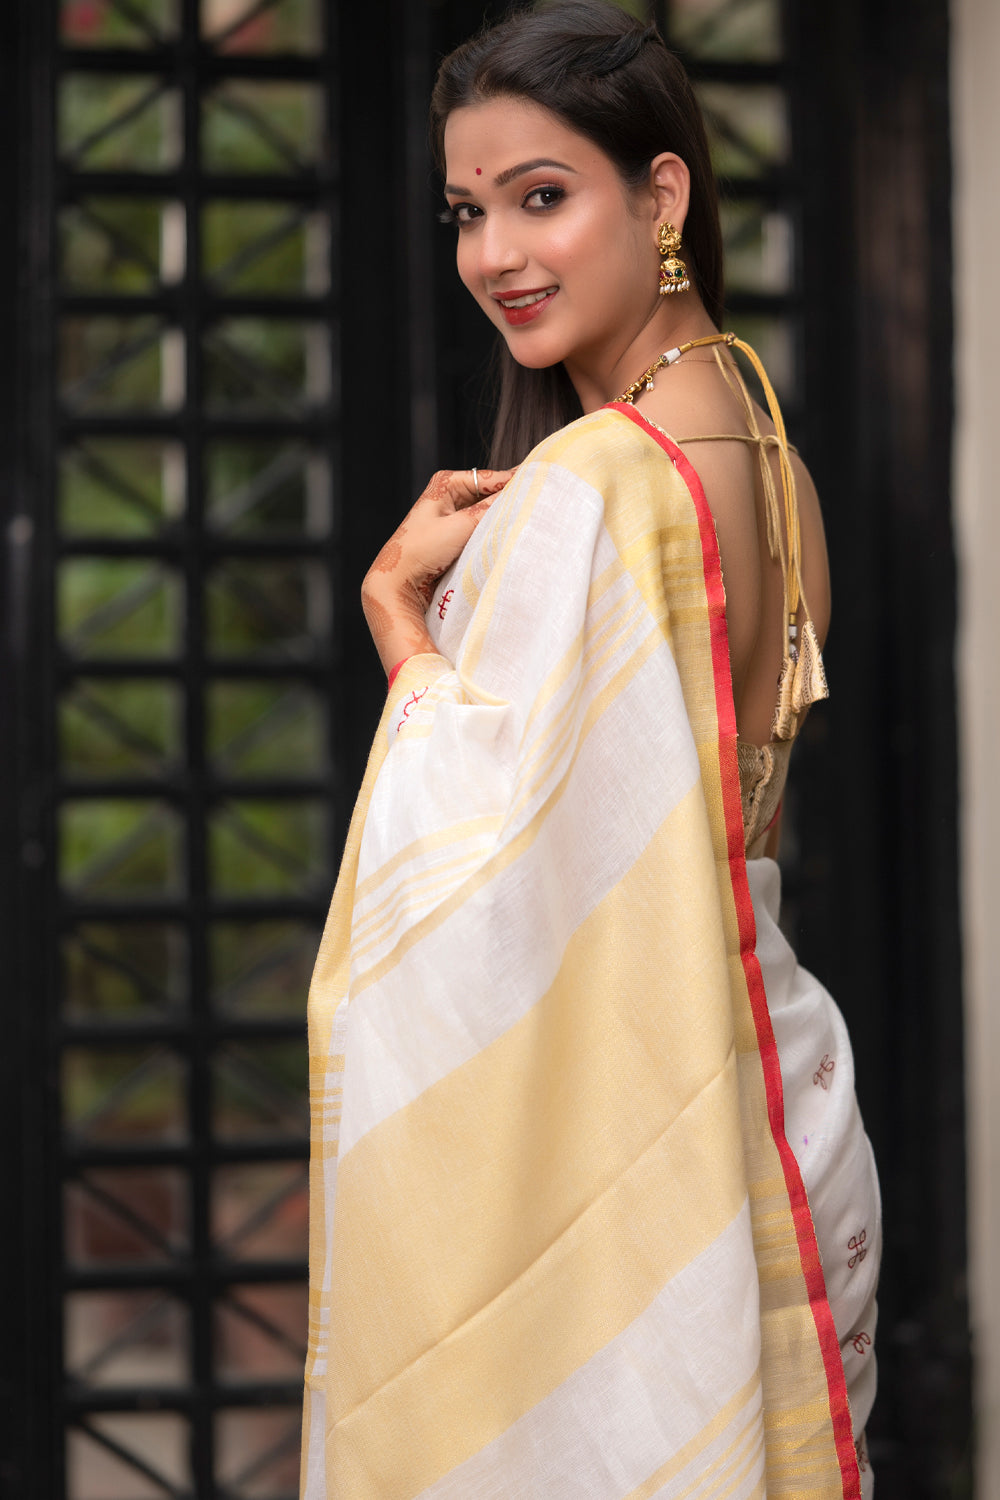 Rangoli Embroidered Border on Pure Linen Saree in White, Red and Gold